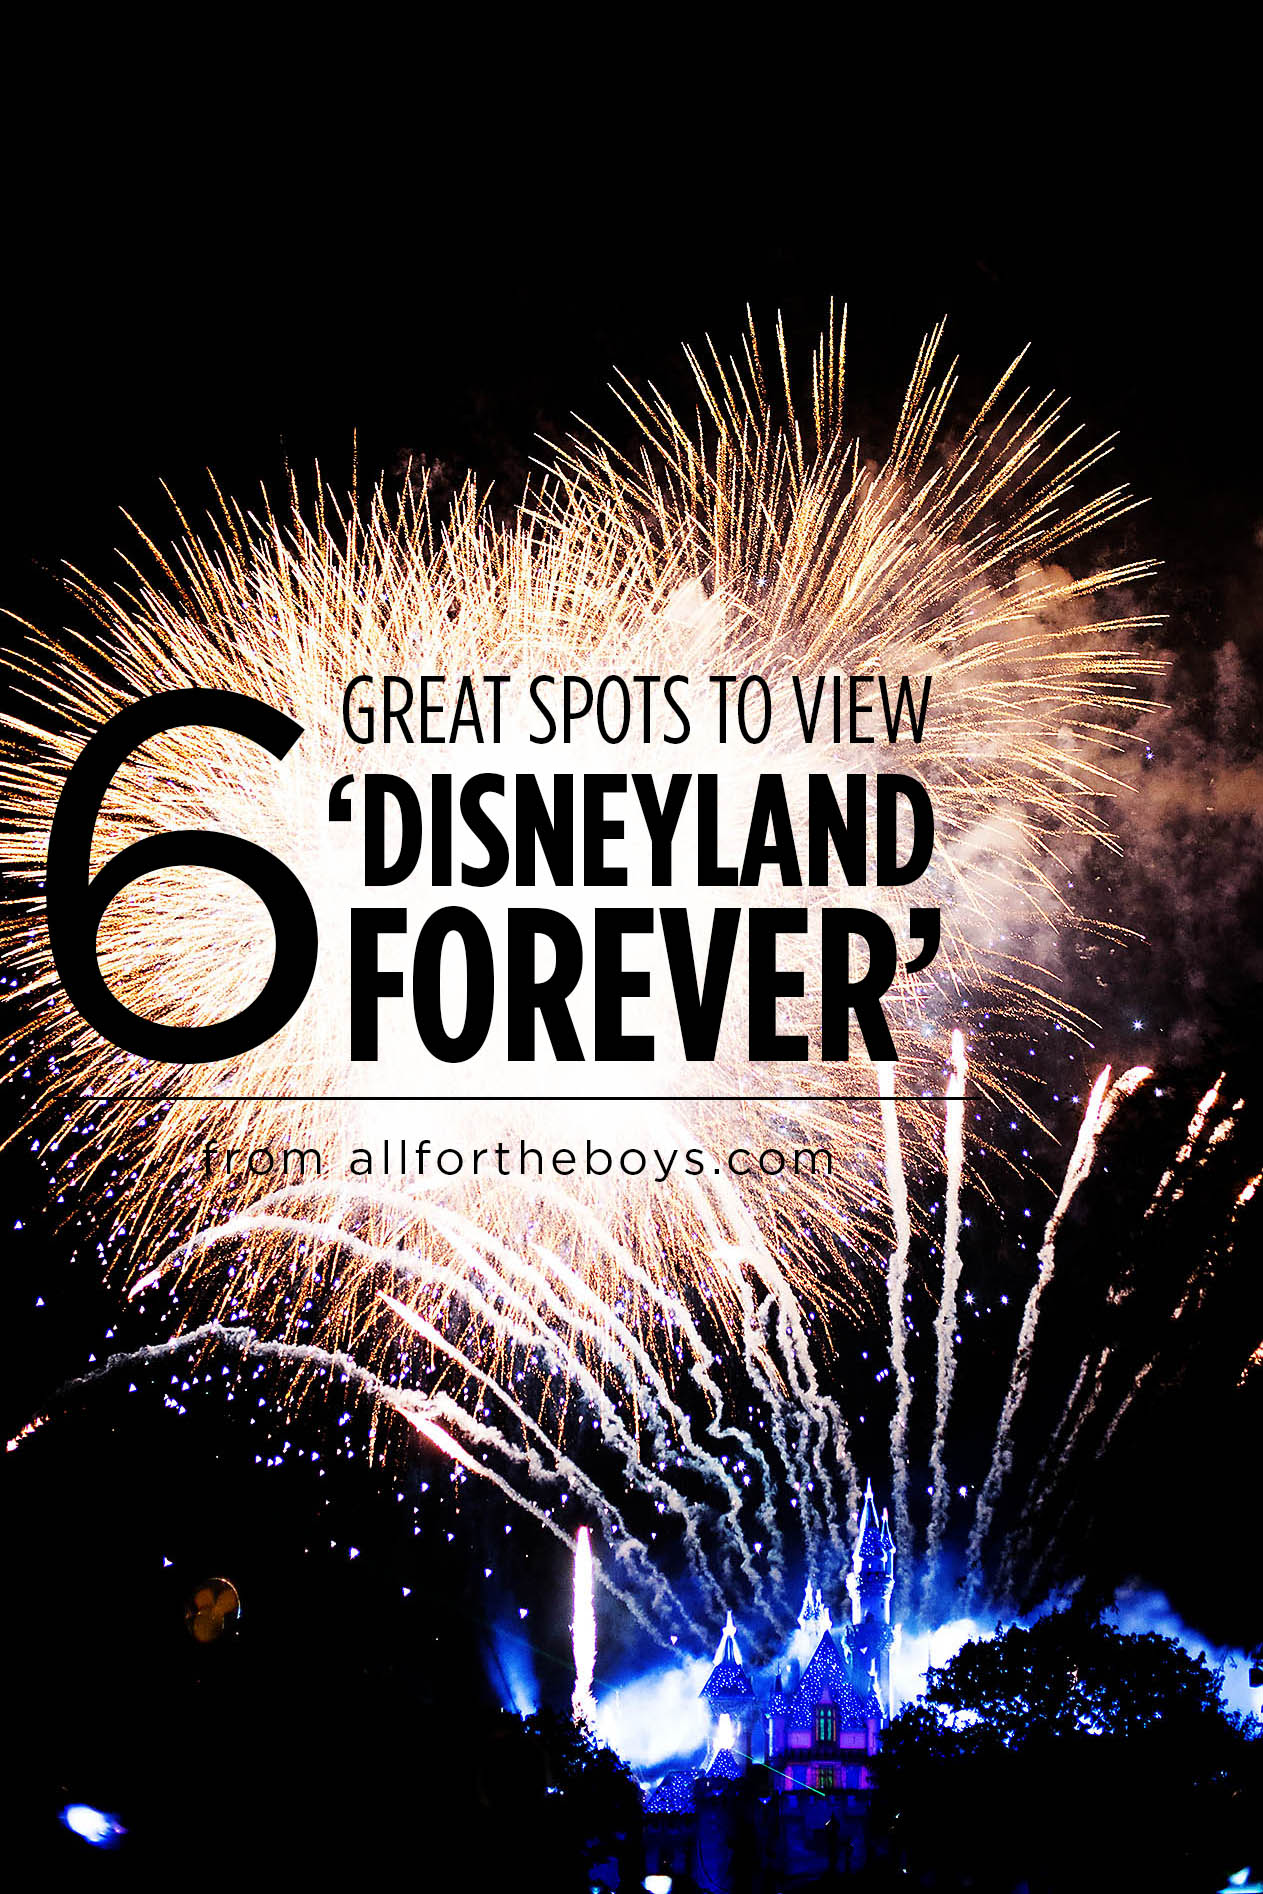 6 great spots to view 'Disneyland Forever' the new fireworks spectacular at Disneyland Resort